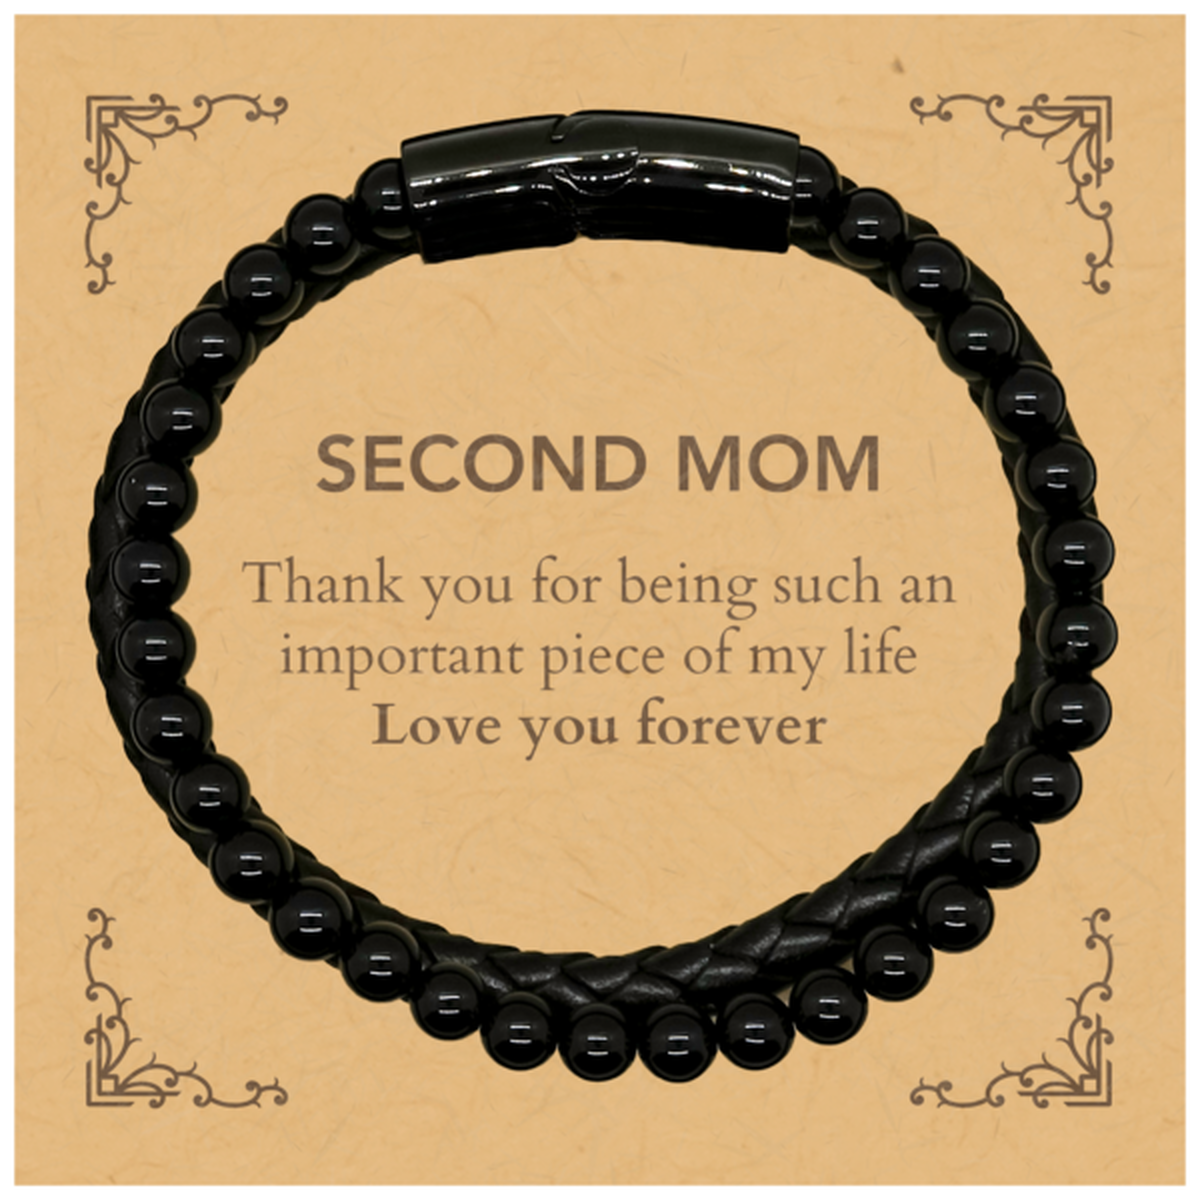 Appropriate Second Mom Stone Leather Bracelets Epic Birthday Gifts for Second Mom Thank you for being such an important piece of my life Second Mom Christmas Mothers Fathers Day